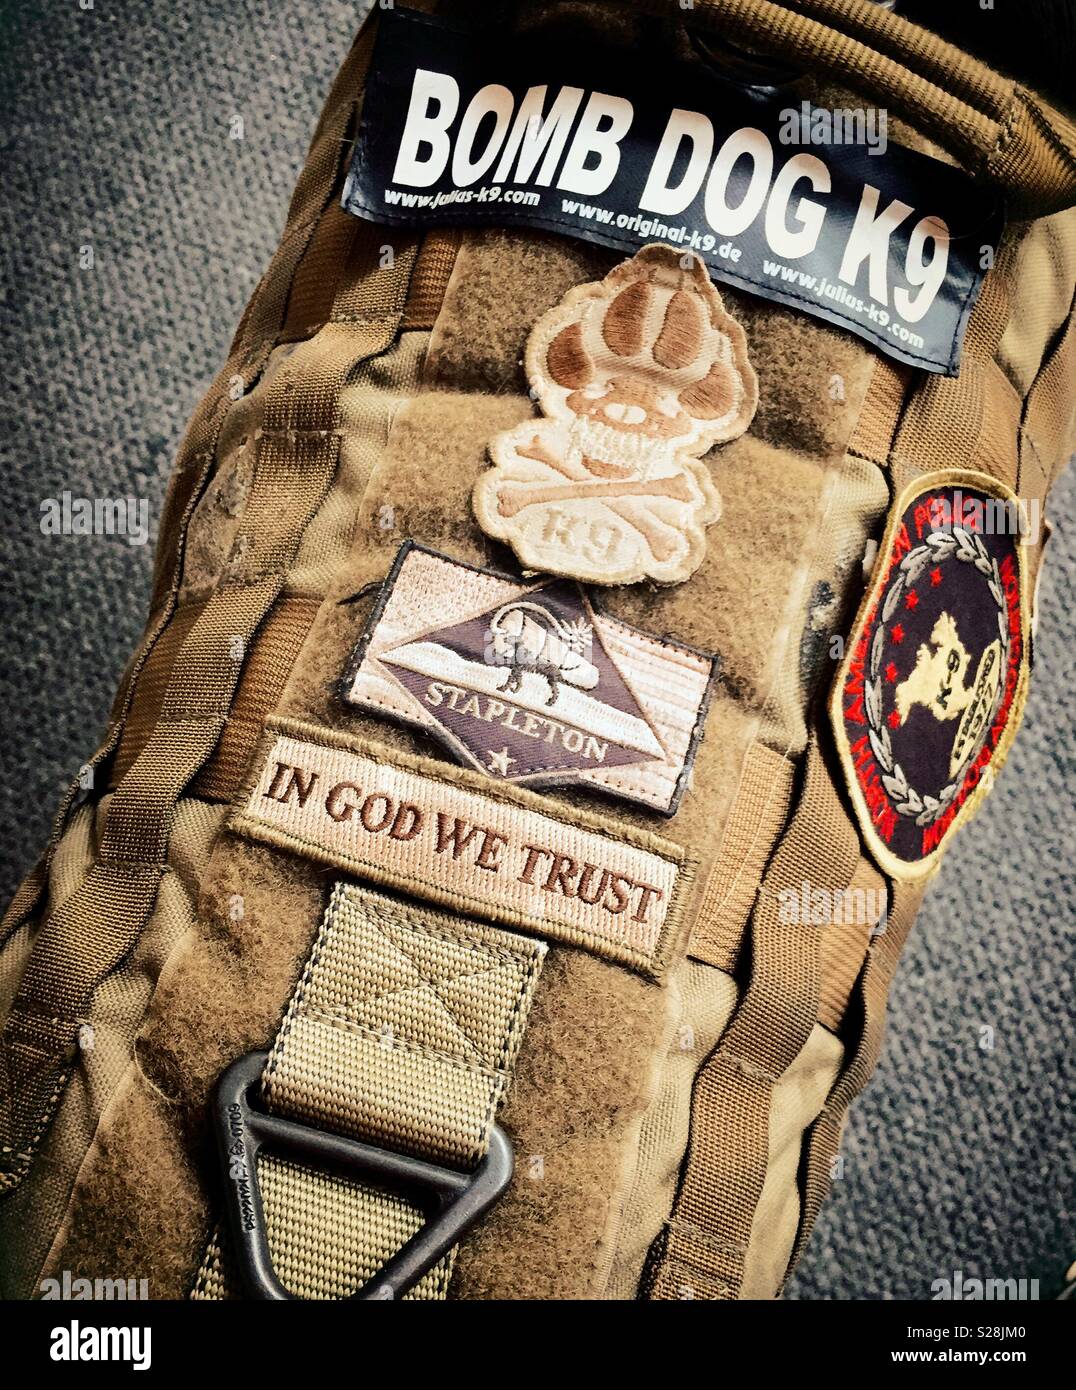 A bomb dog vest with many patches, New York City, USA Stock Photo